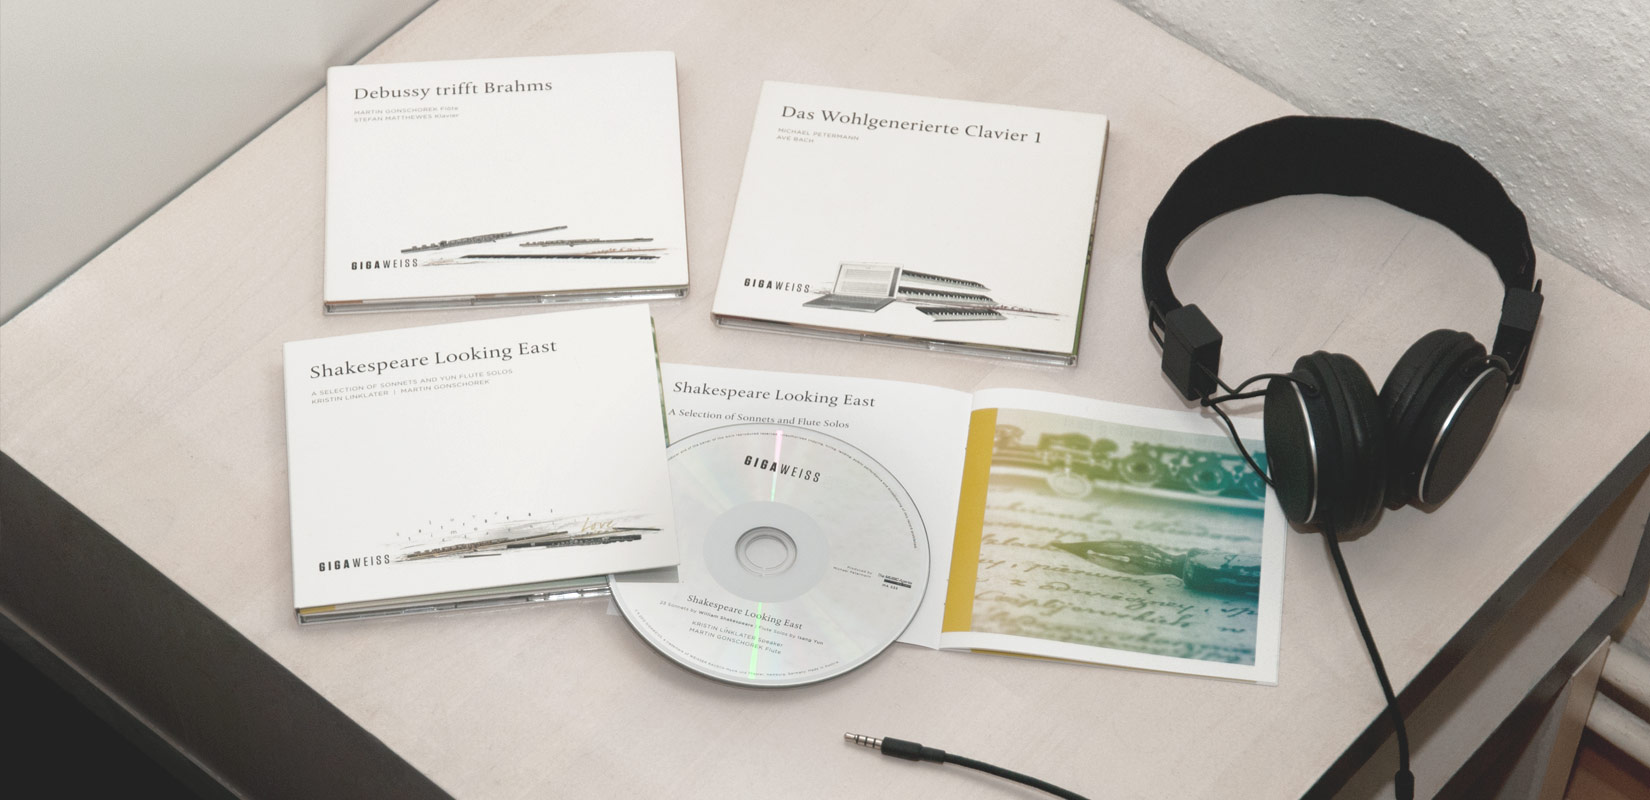 Gigaweiss – CD-Labels